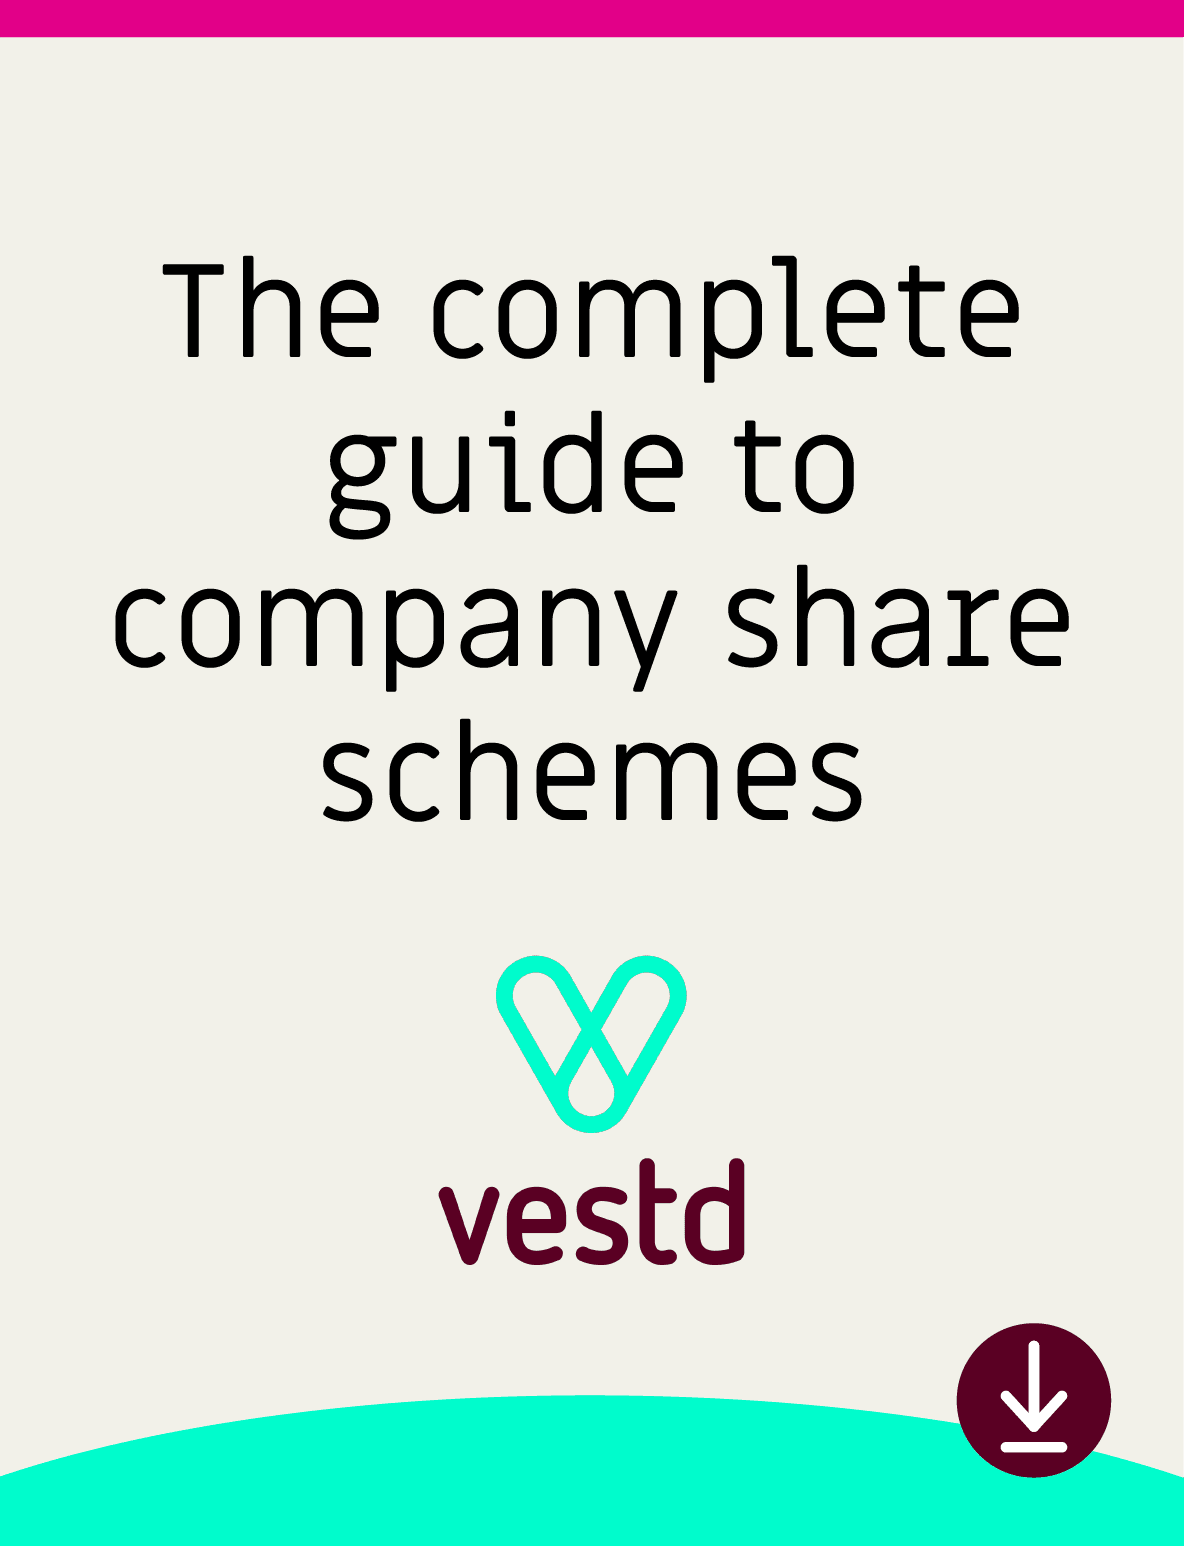 The complete guide to setting up a company share scheme